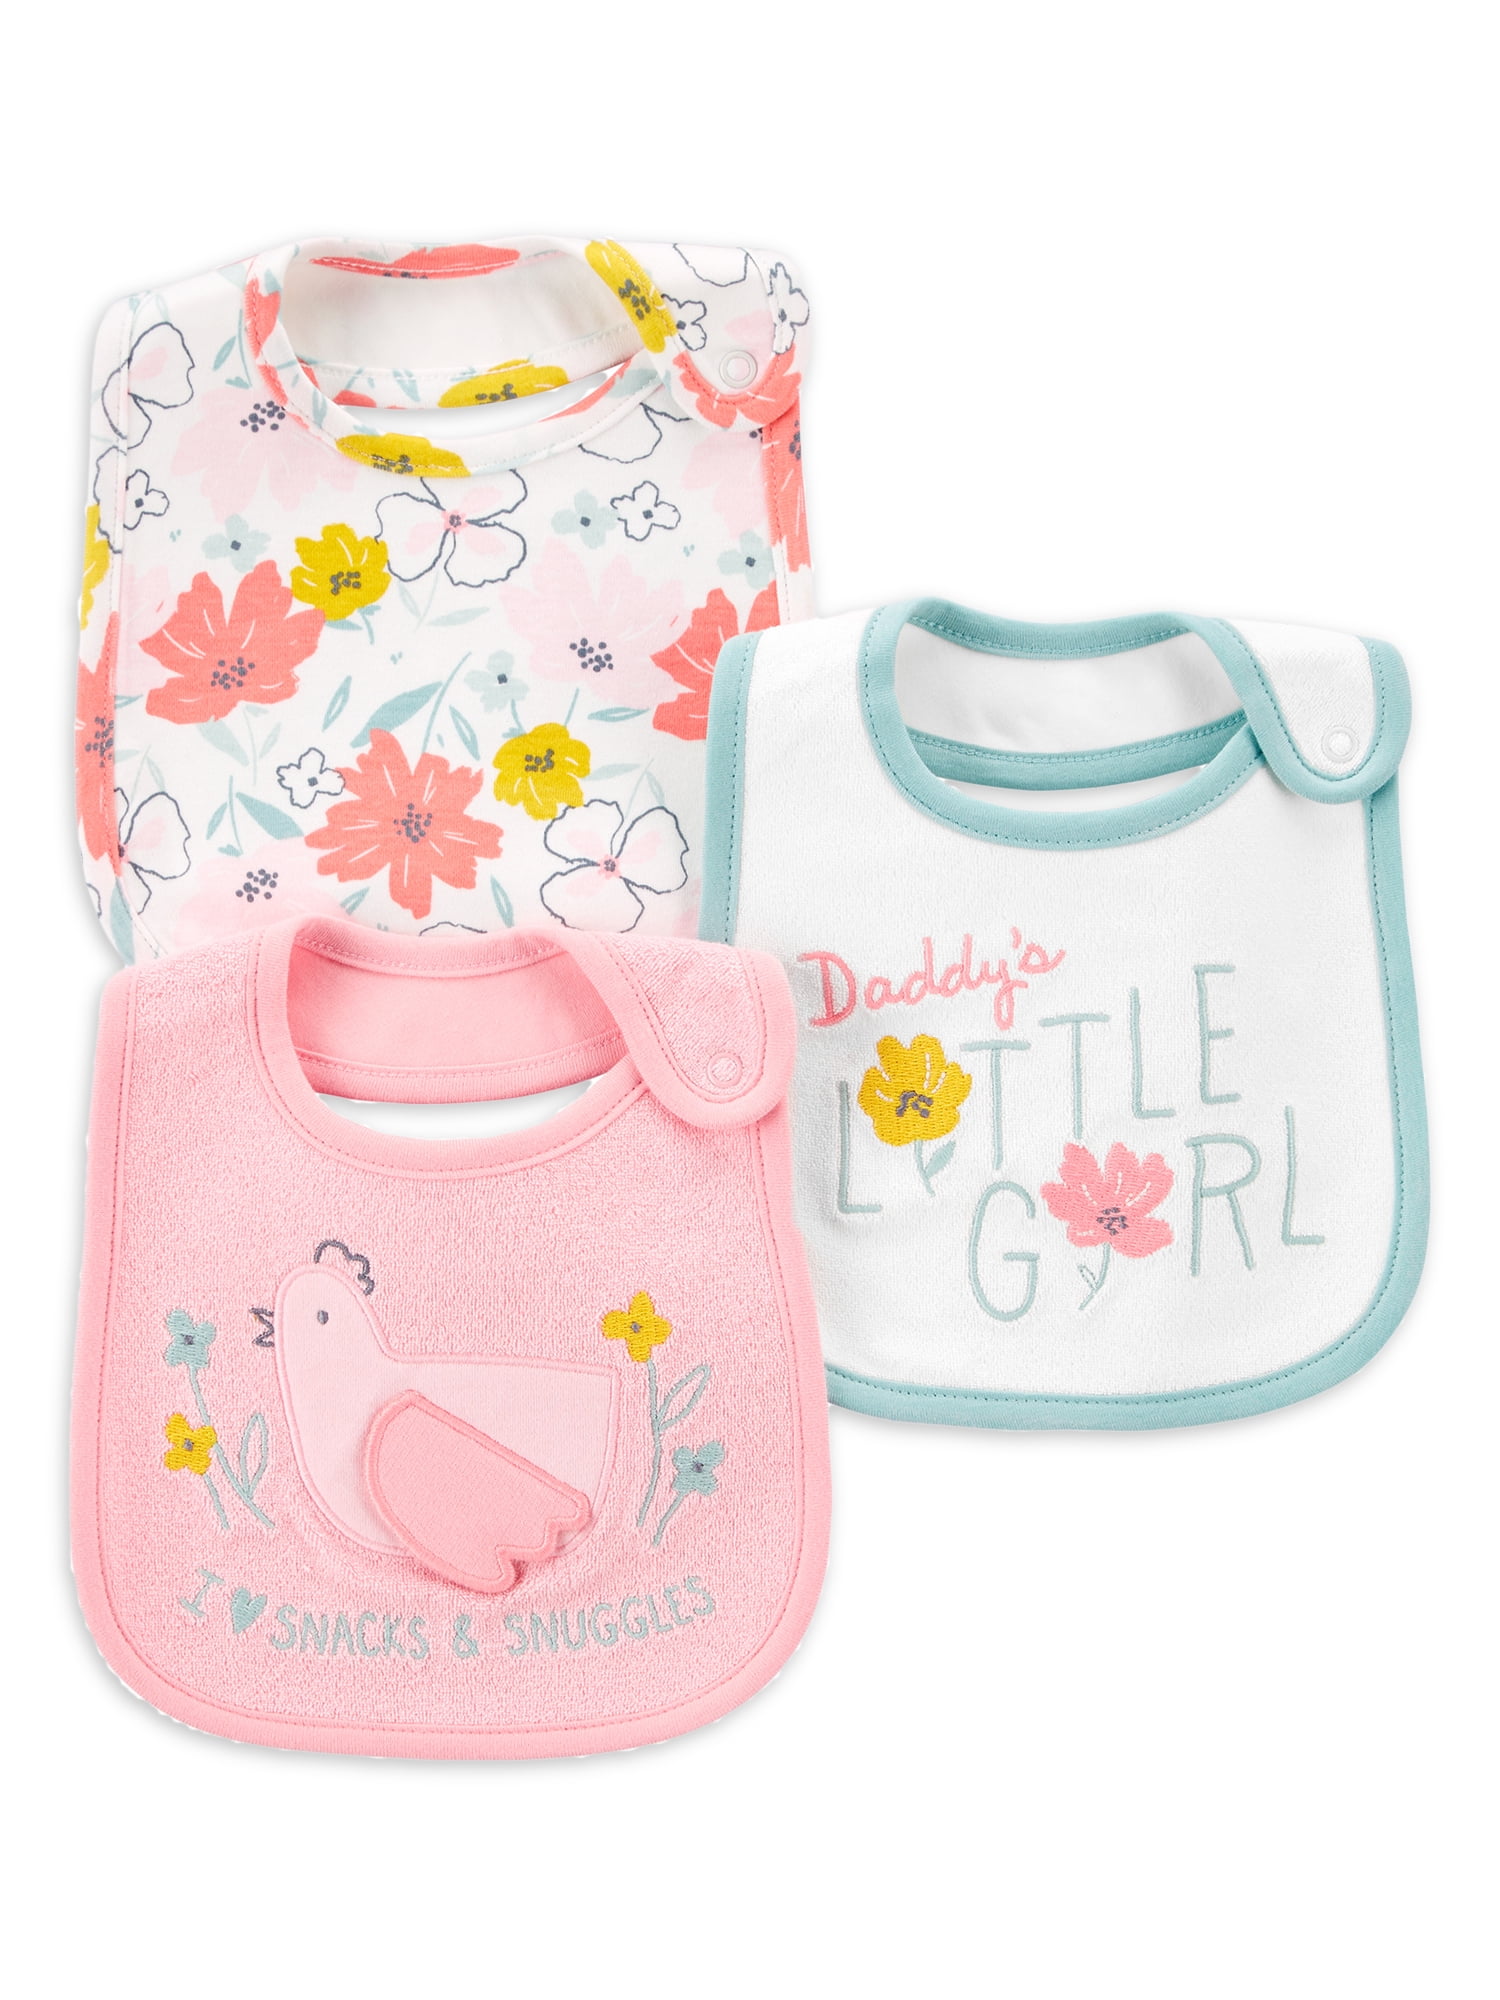 Baby Shower Gift-Baby Girl-Baby Accessories Baby Girl Bib in Owl and Floral Fabric